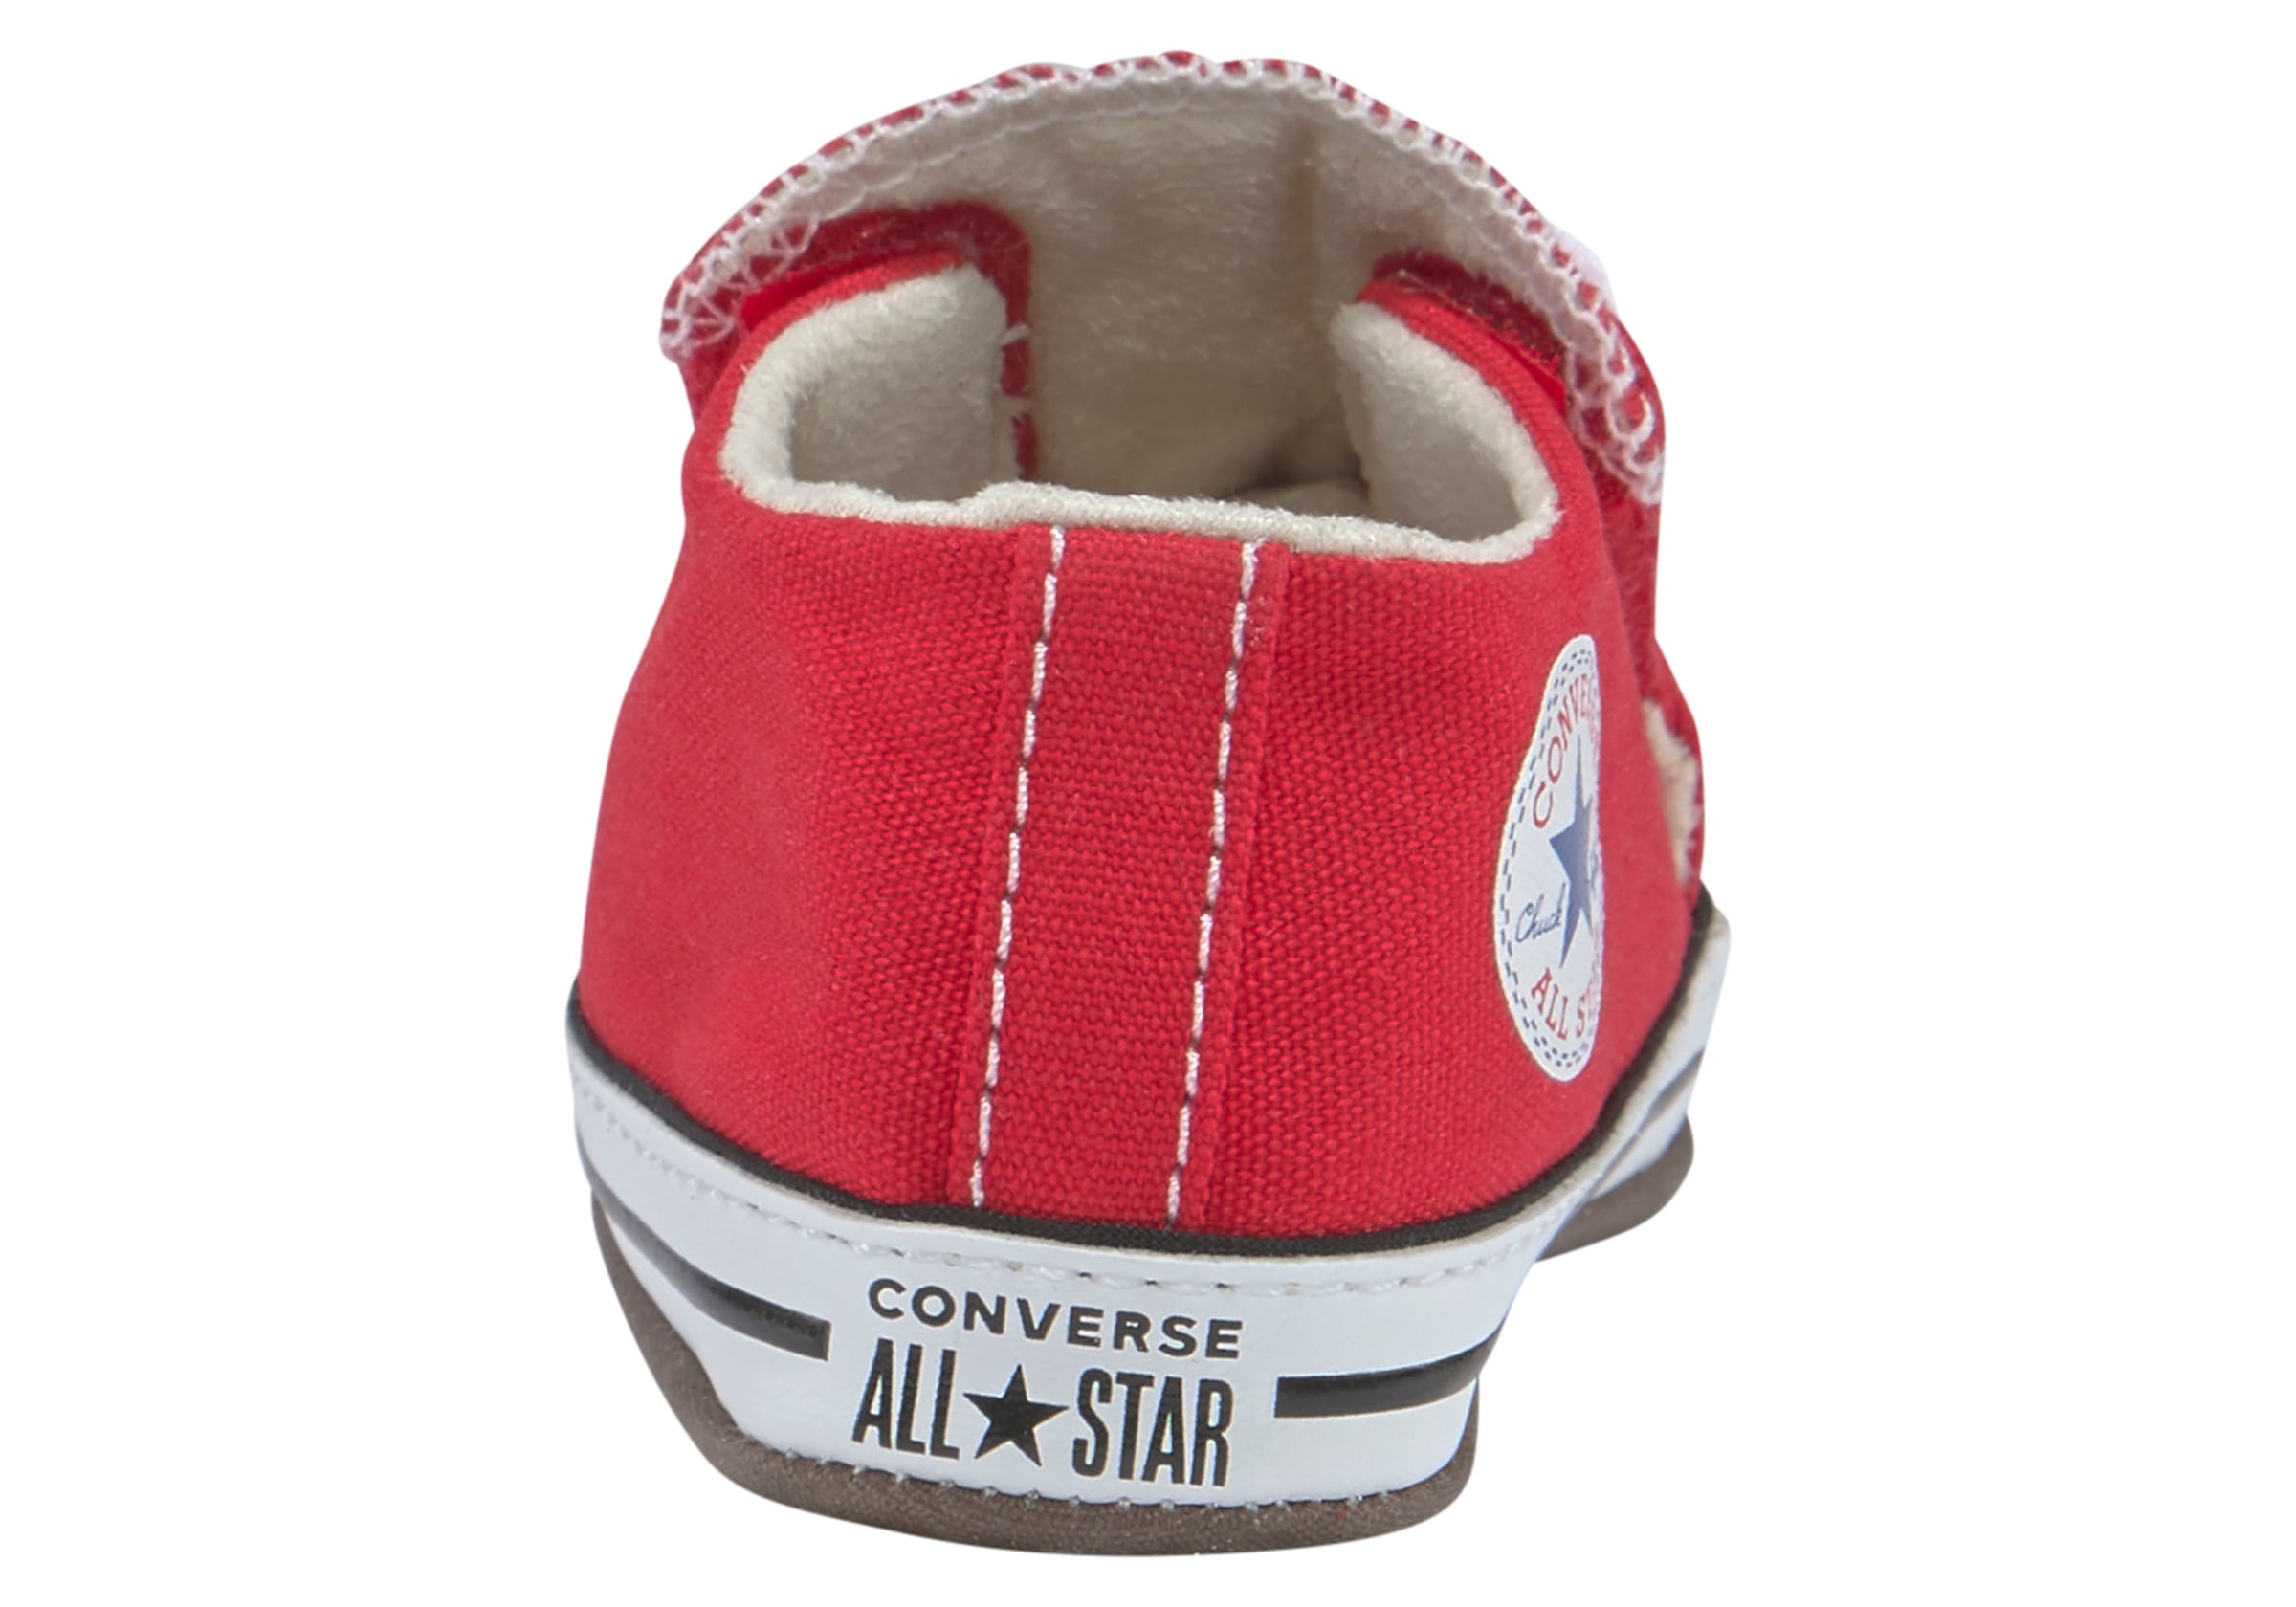 Babys »Kinder Canvas Chuck Color-Mid«, Sneaker bei Converse Star ♕ All Taylor für Cribster